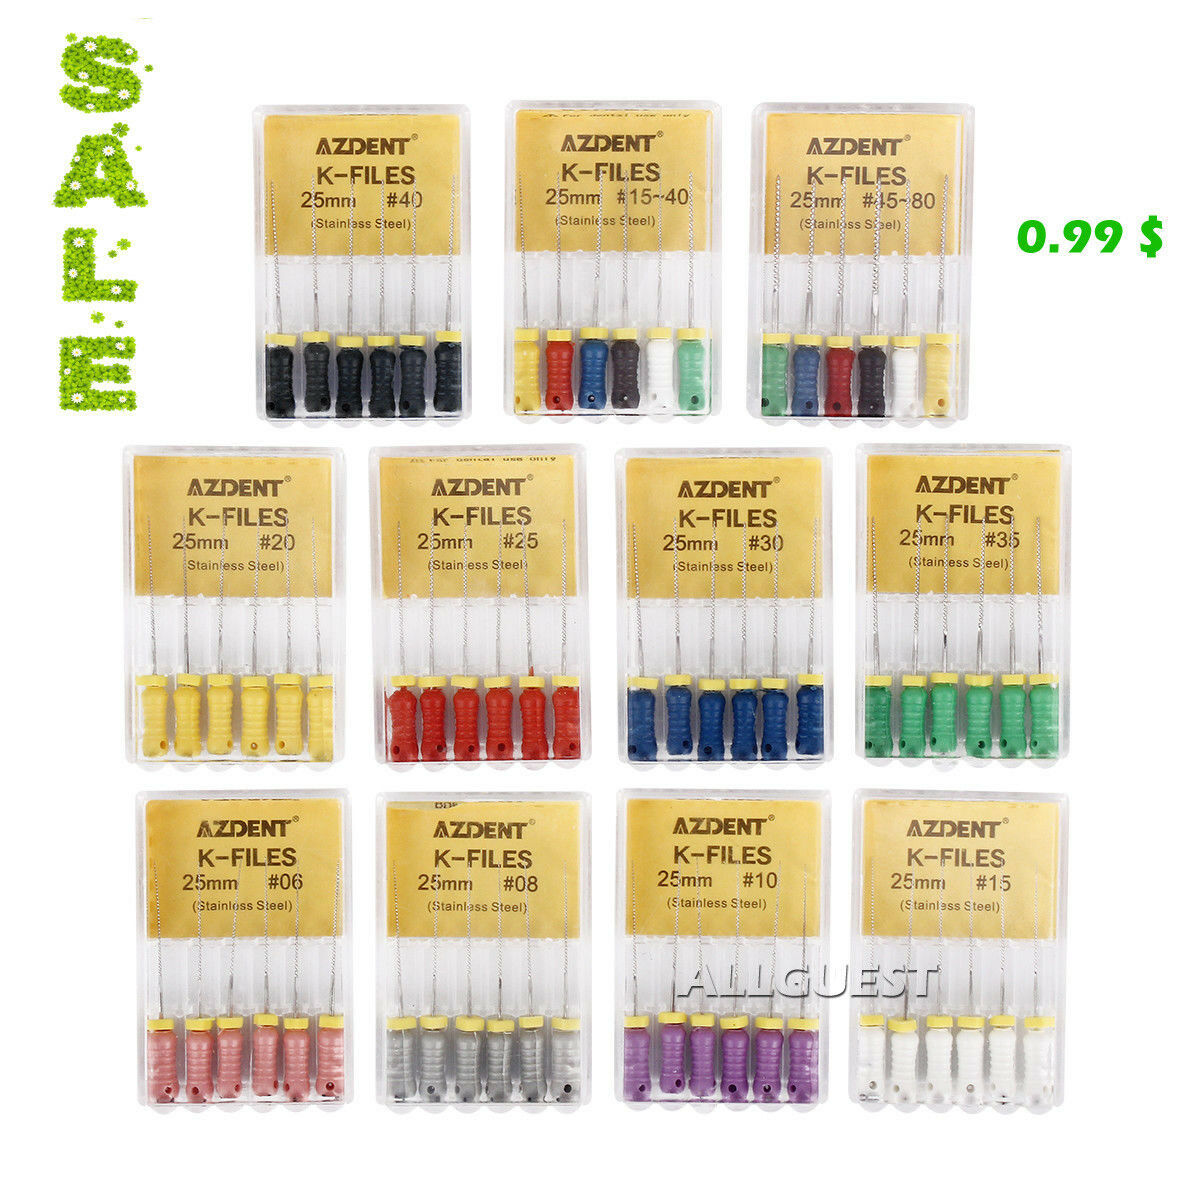 Dental Endodontic Root Canal Hand Use K-files 25mm/21mm Stainless Steel 6pcs/box